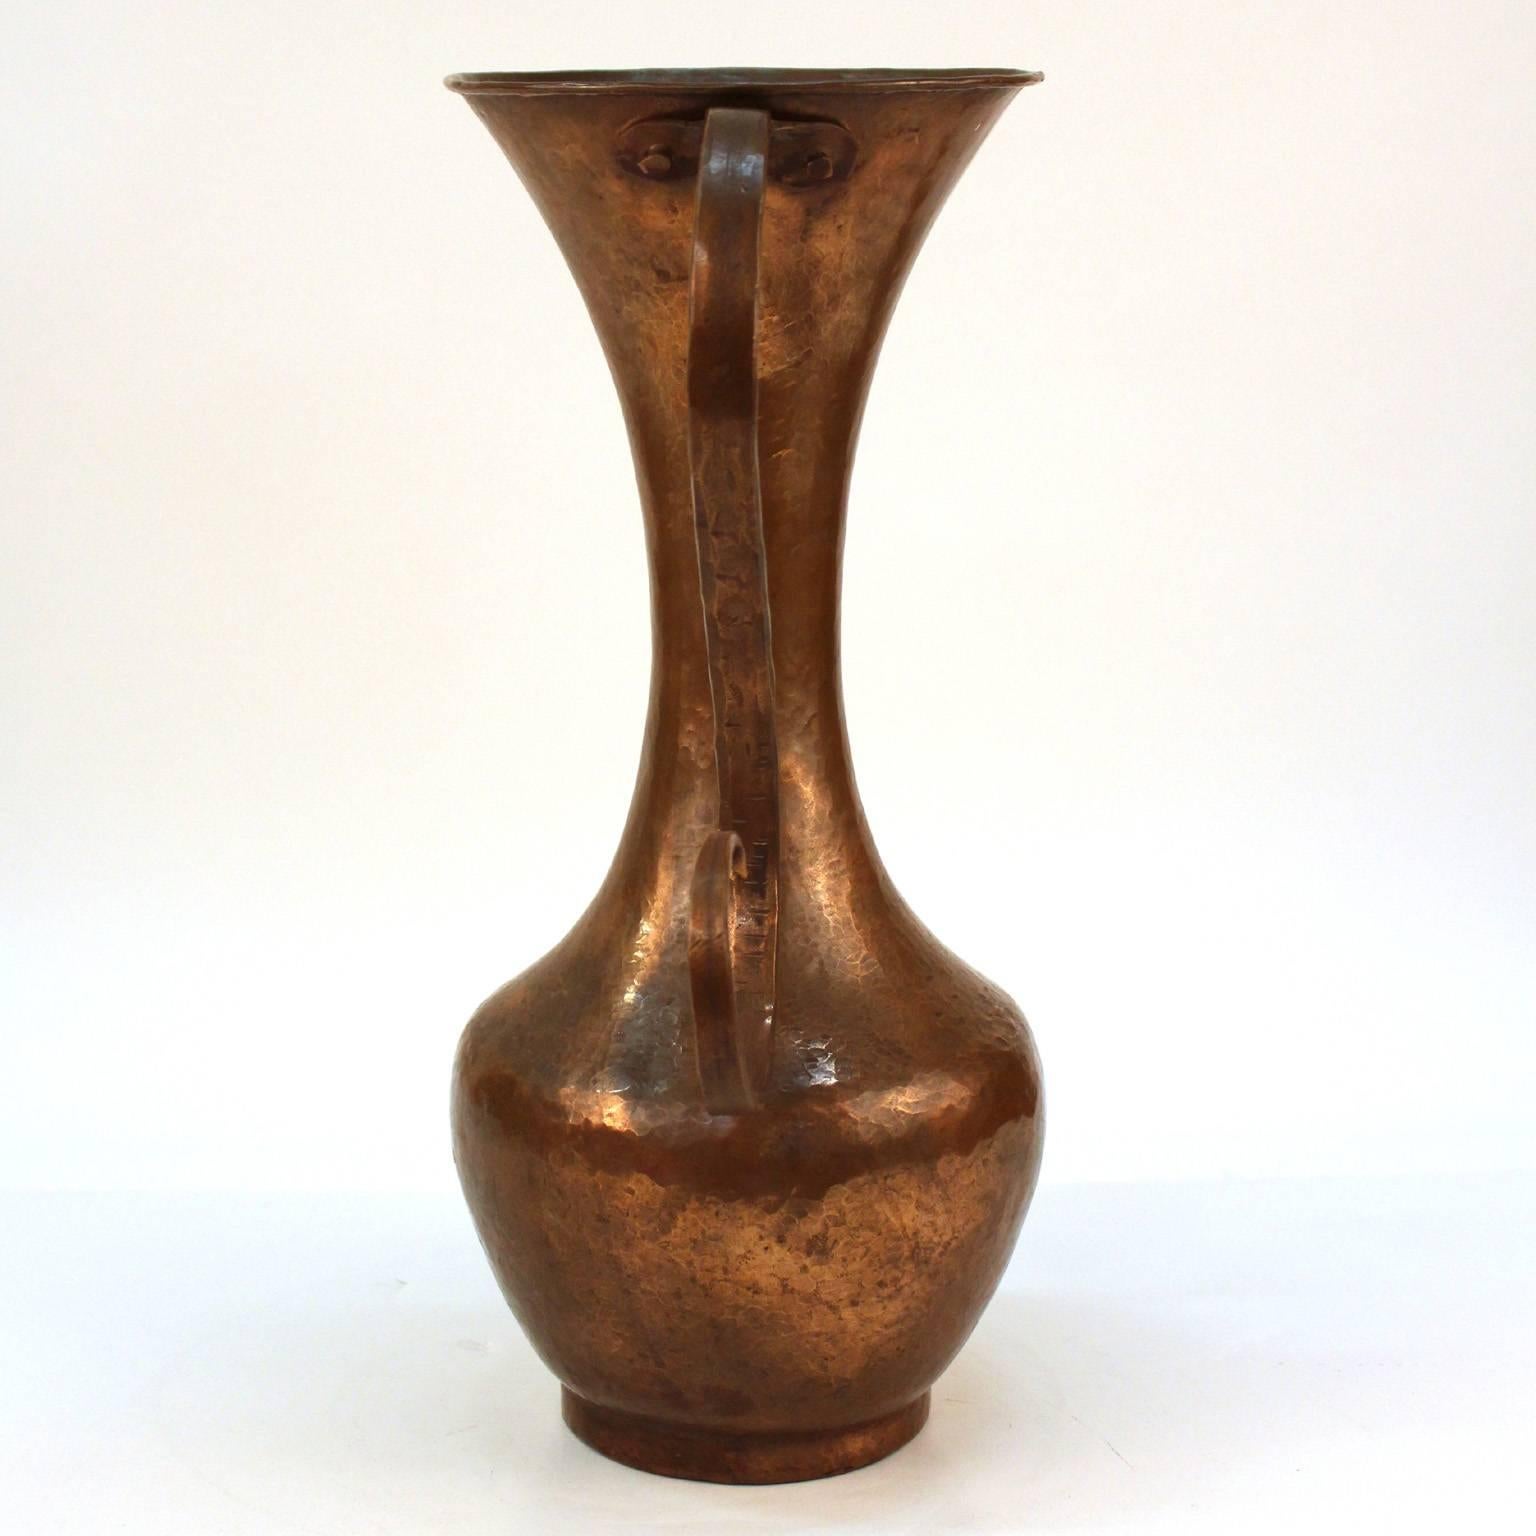 Early 20th Century Italian Modernist Hammered Copper Vase